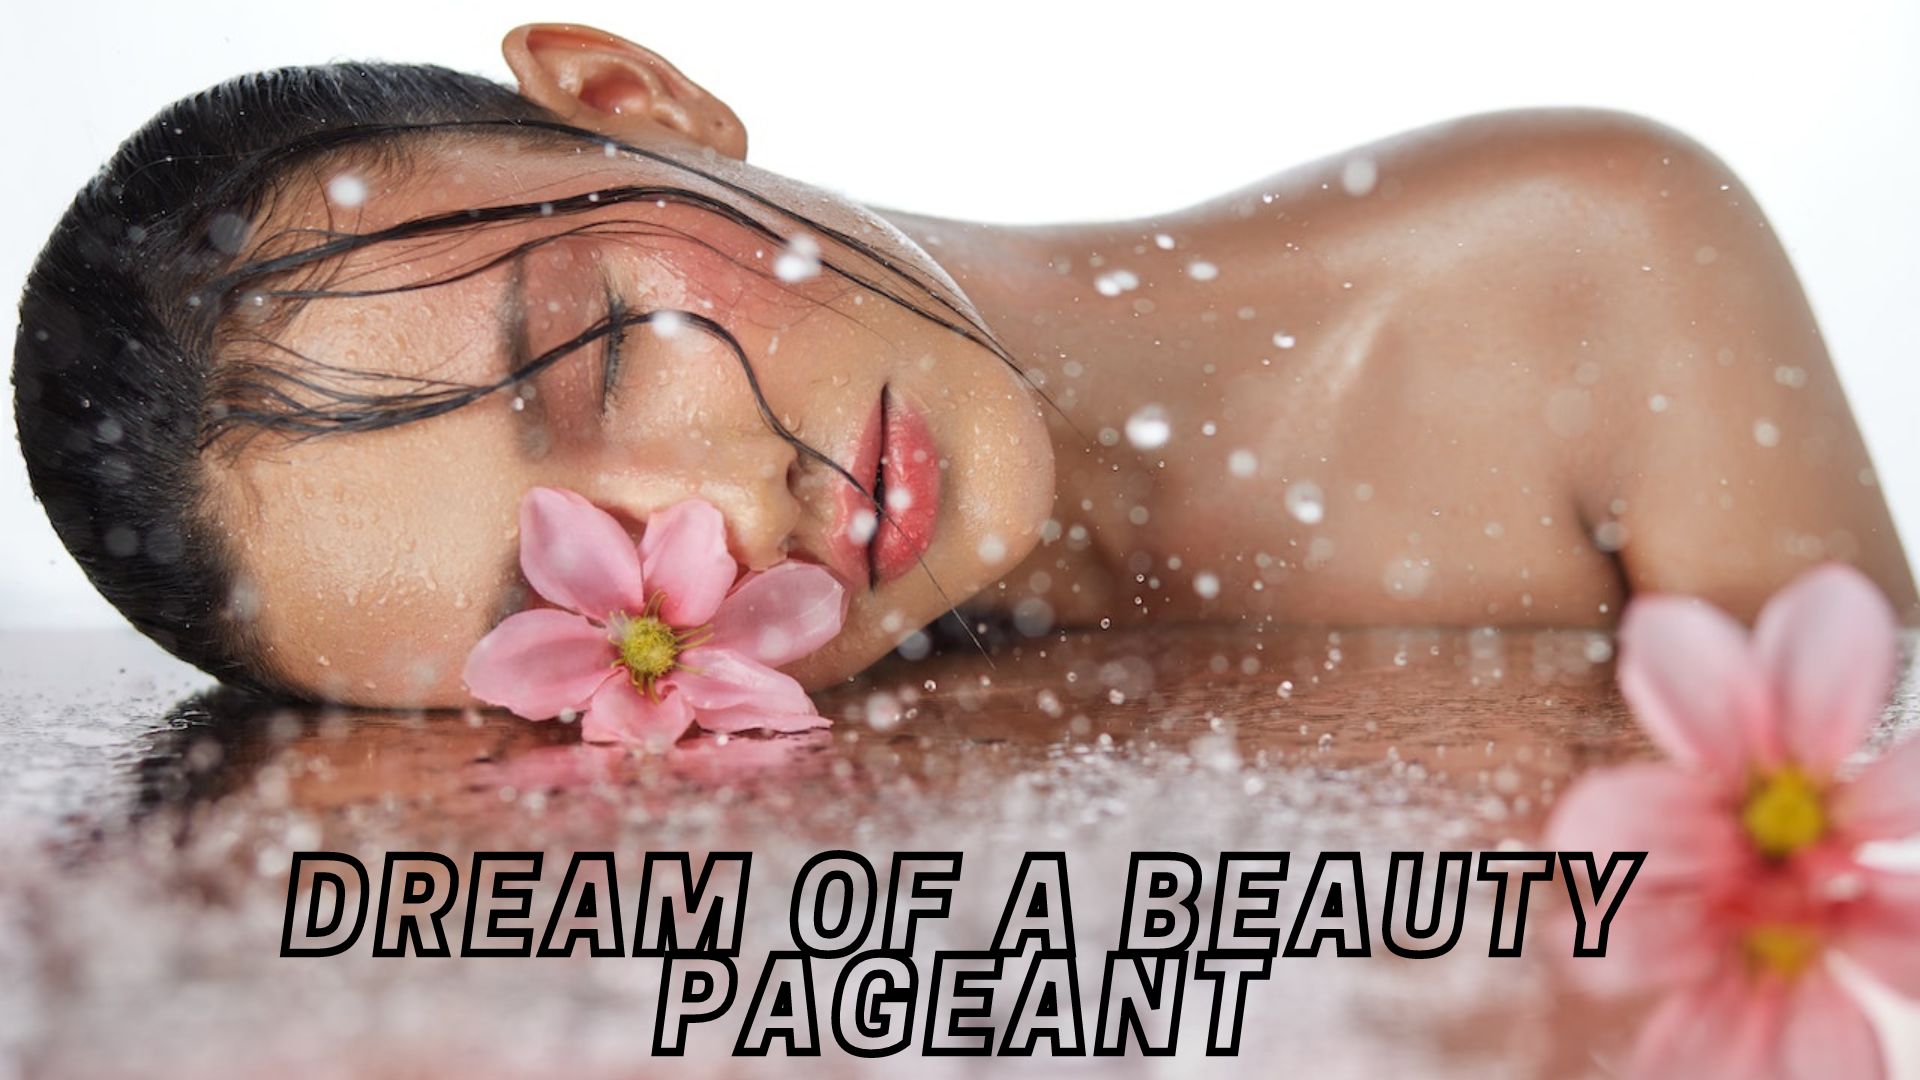 Dream Of A Beauty Pageant - The Good And Bad Interpretation